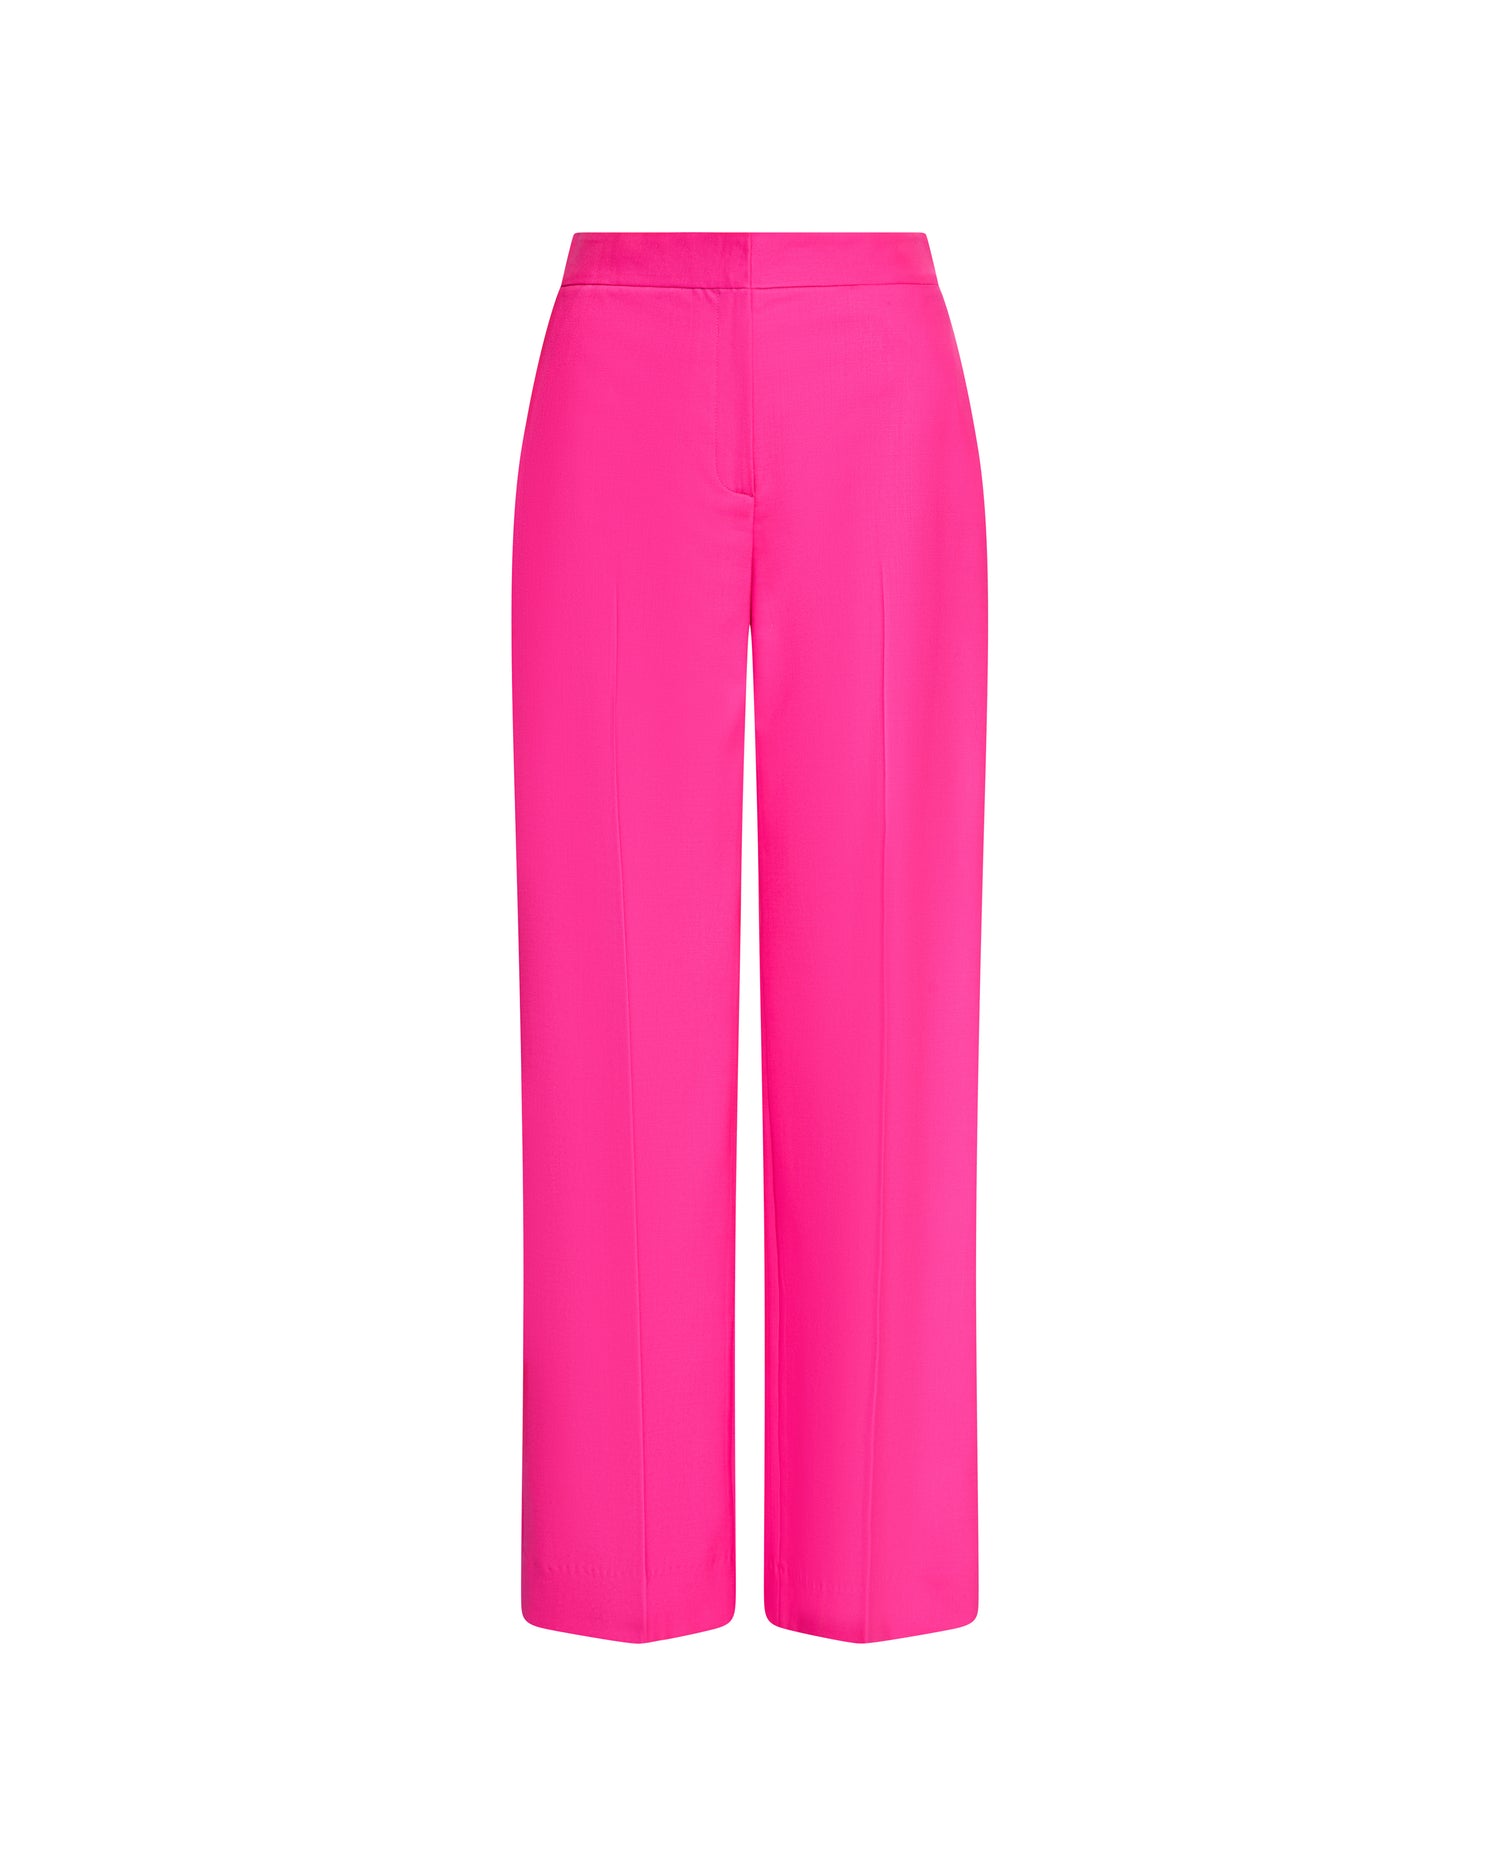 Hang Loose Wide Leg Trousers in Magenta Pink – Oh Polly US